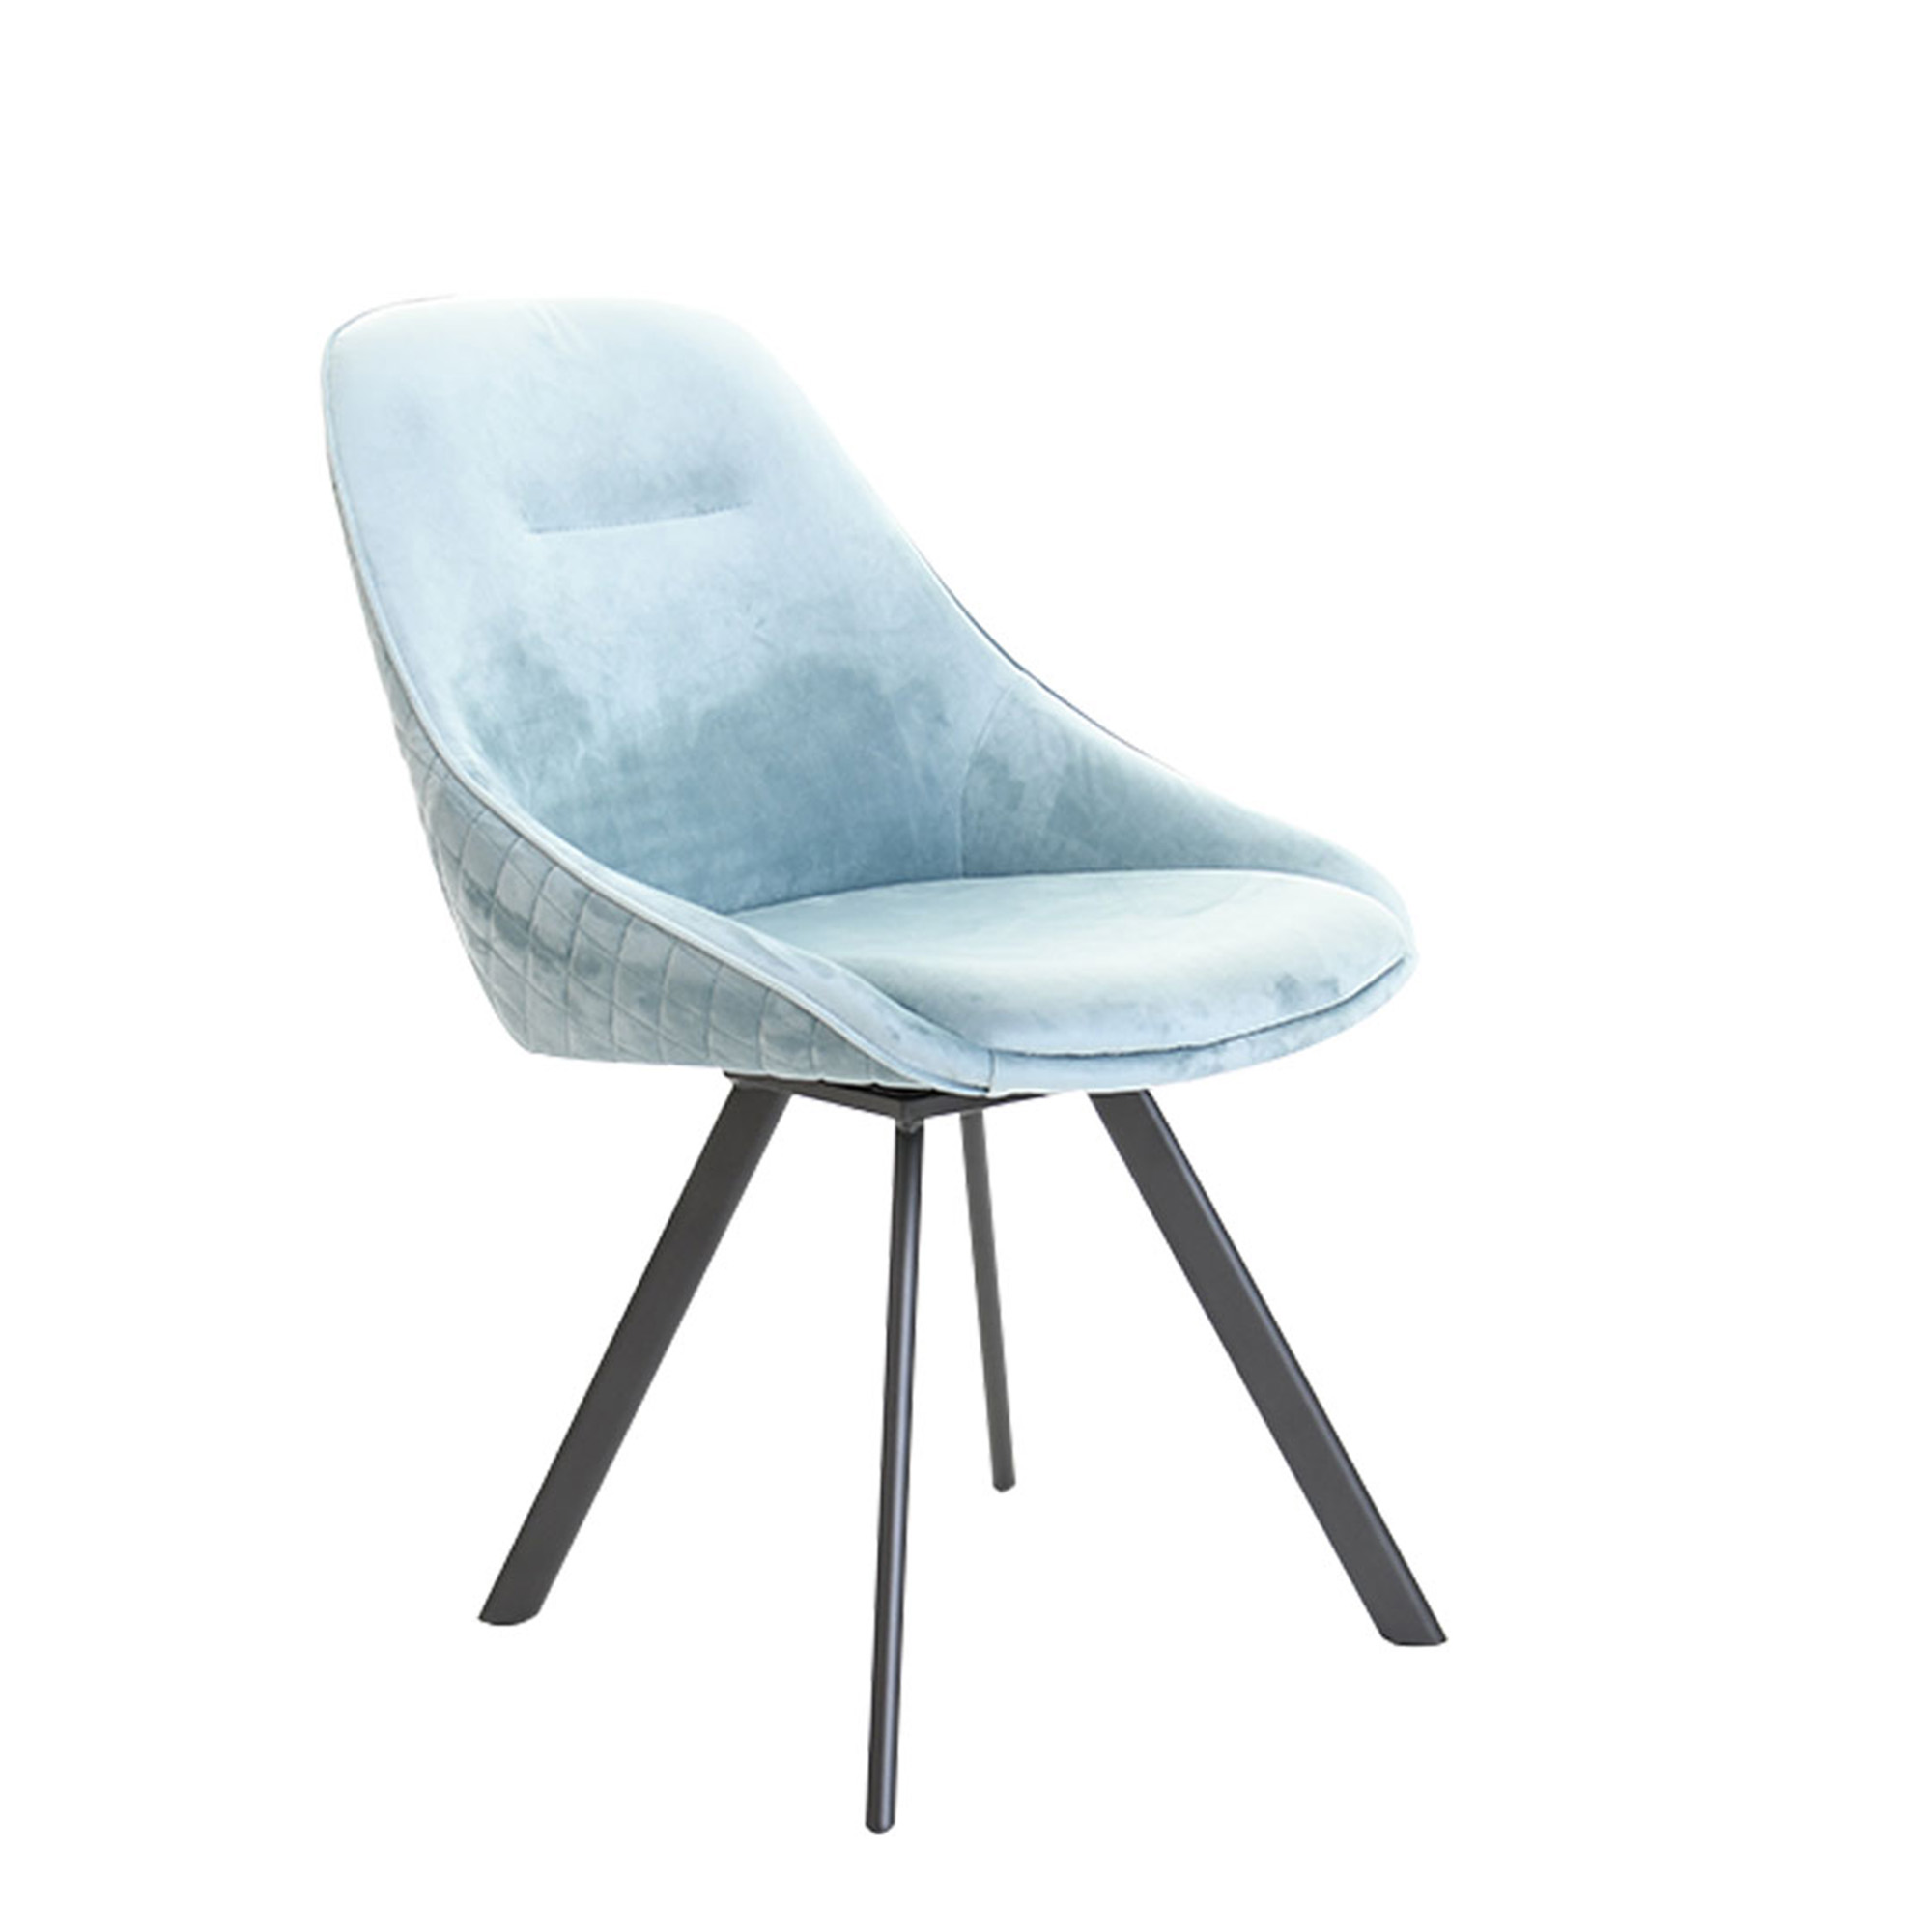 Swivel Dining Chair In Blue Velvet, Swivel Dining Chairs With Arms